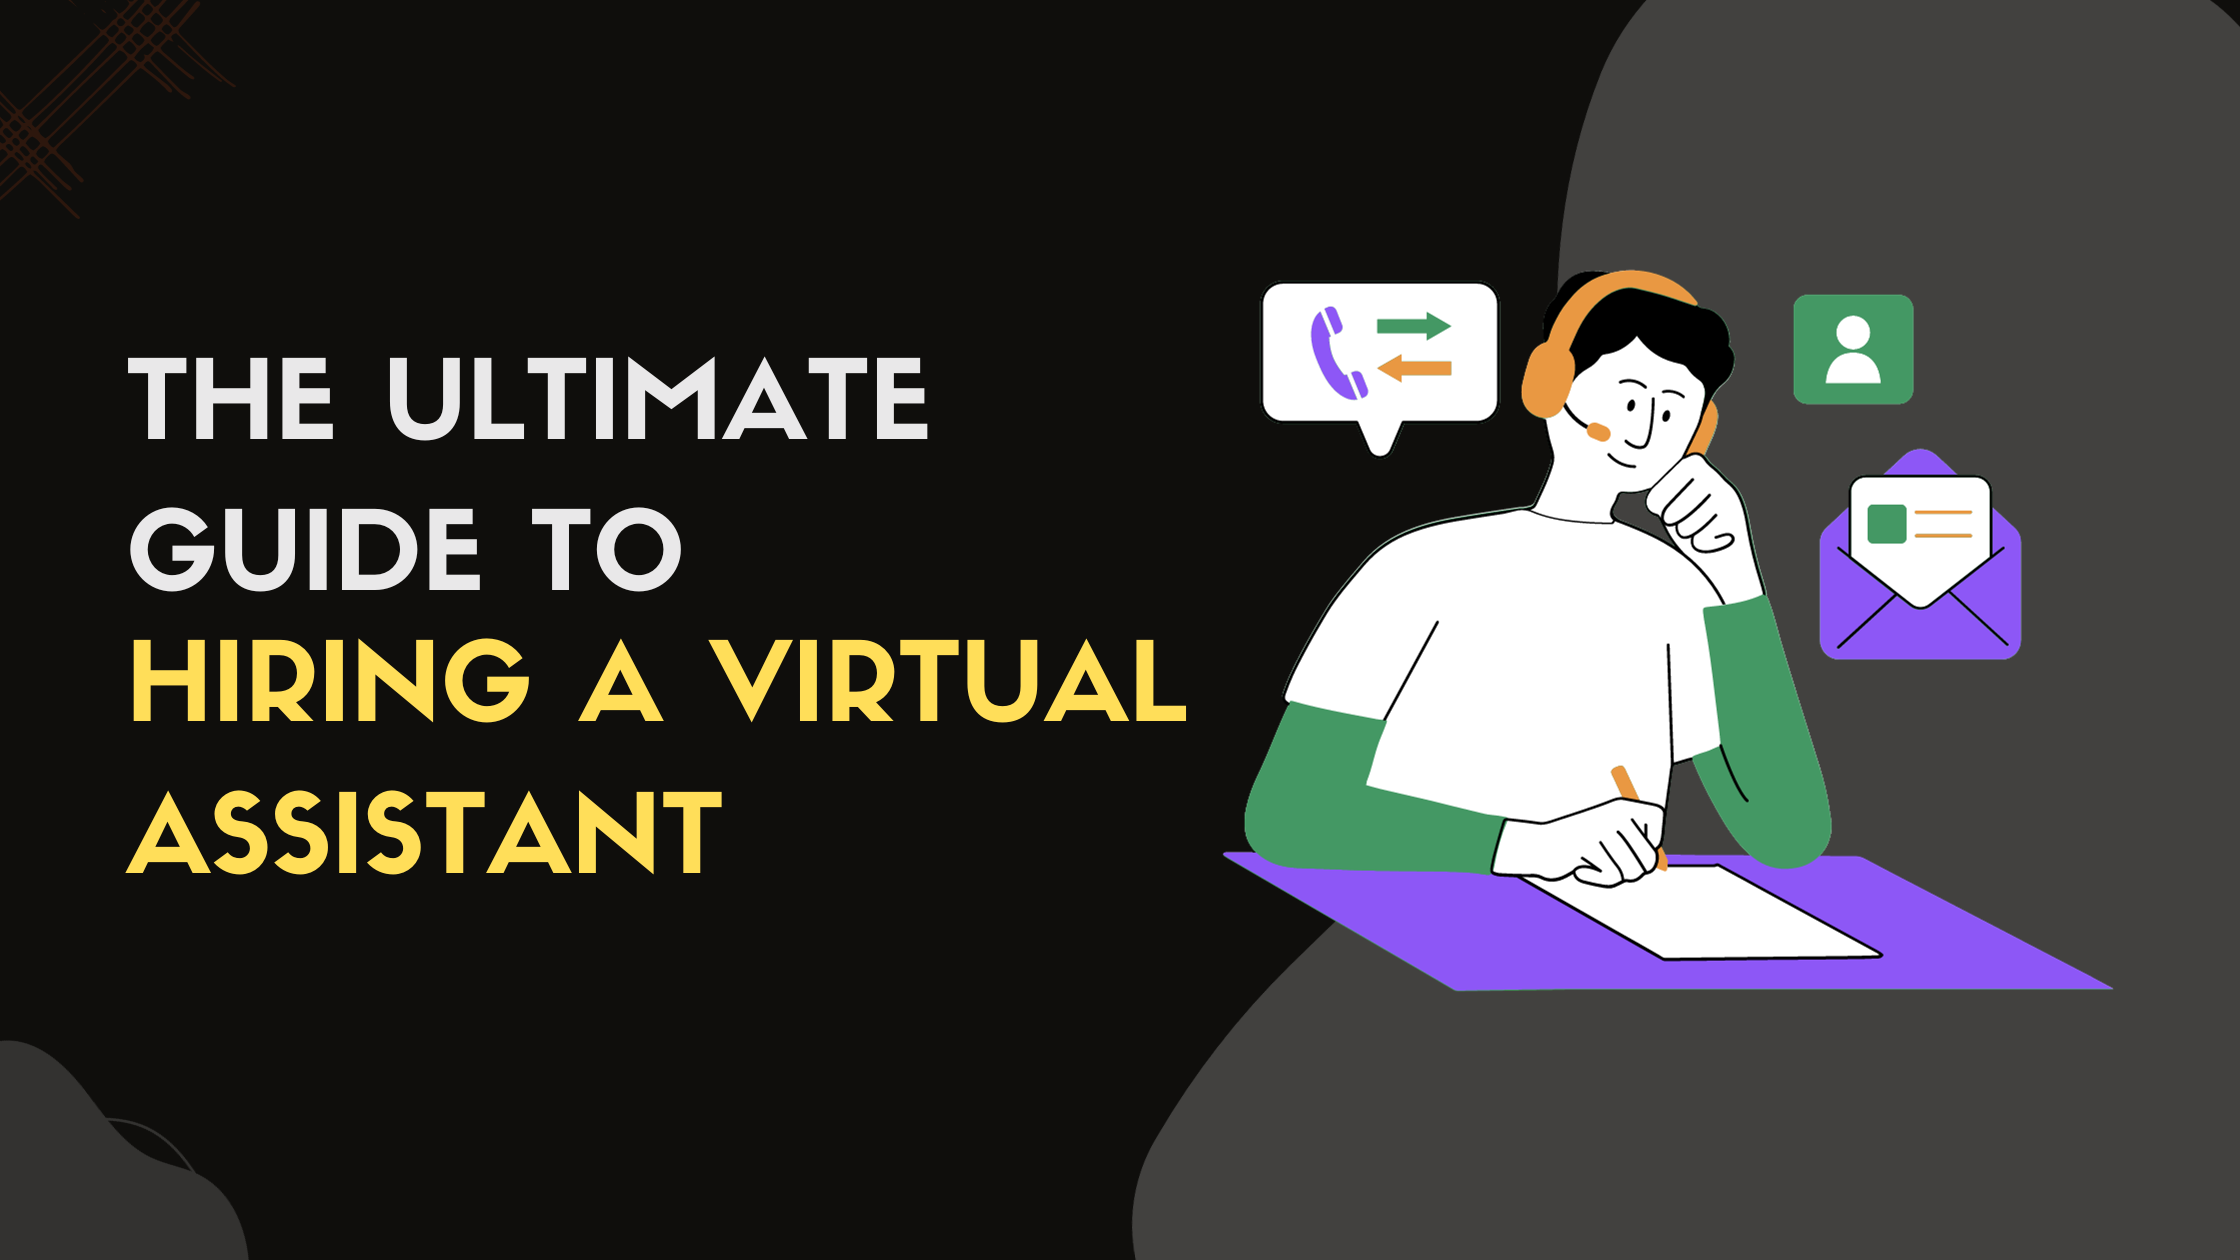 The Ultimate Guide to Hiring a Virtual Assistant